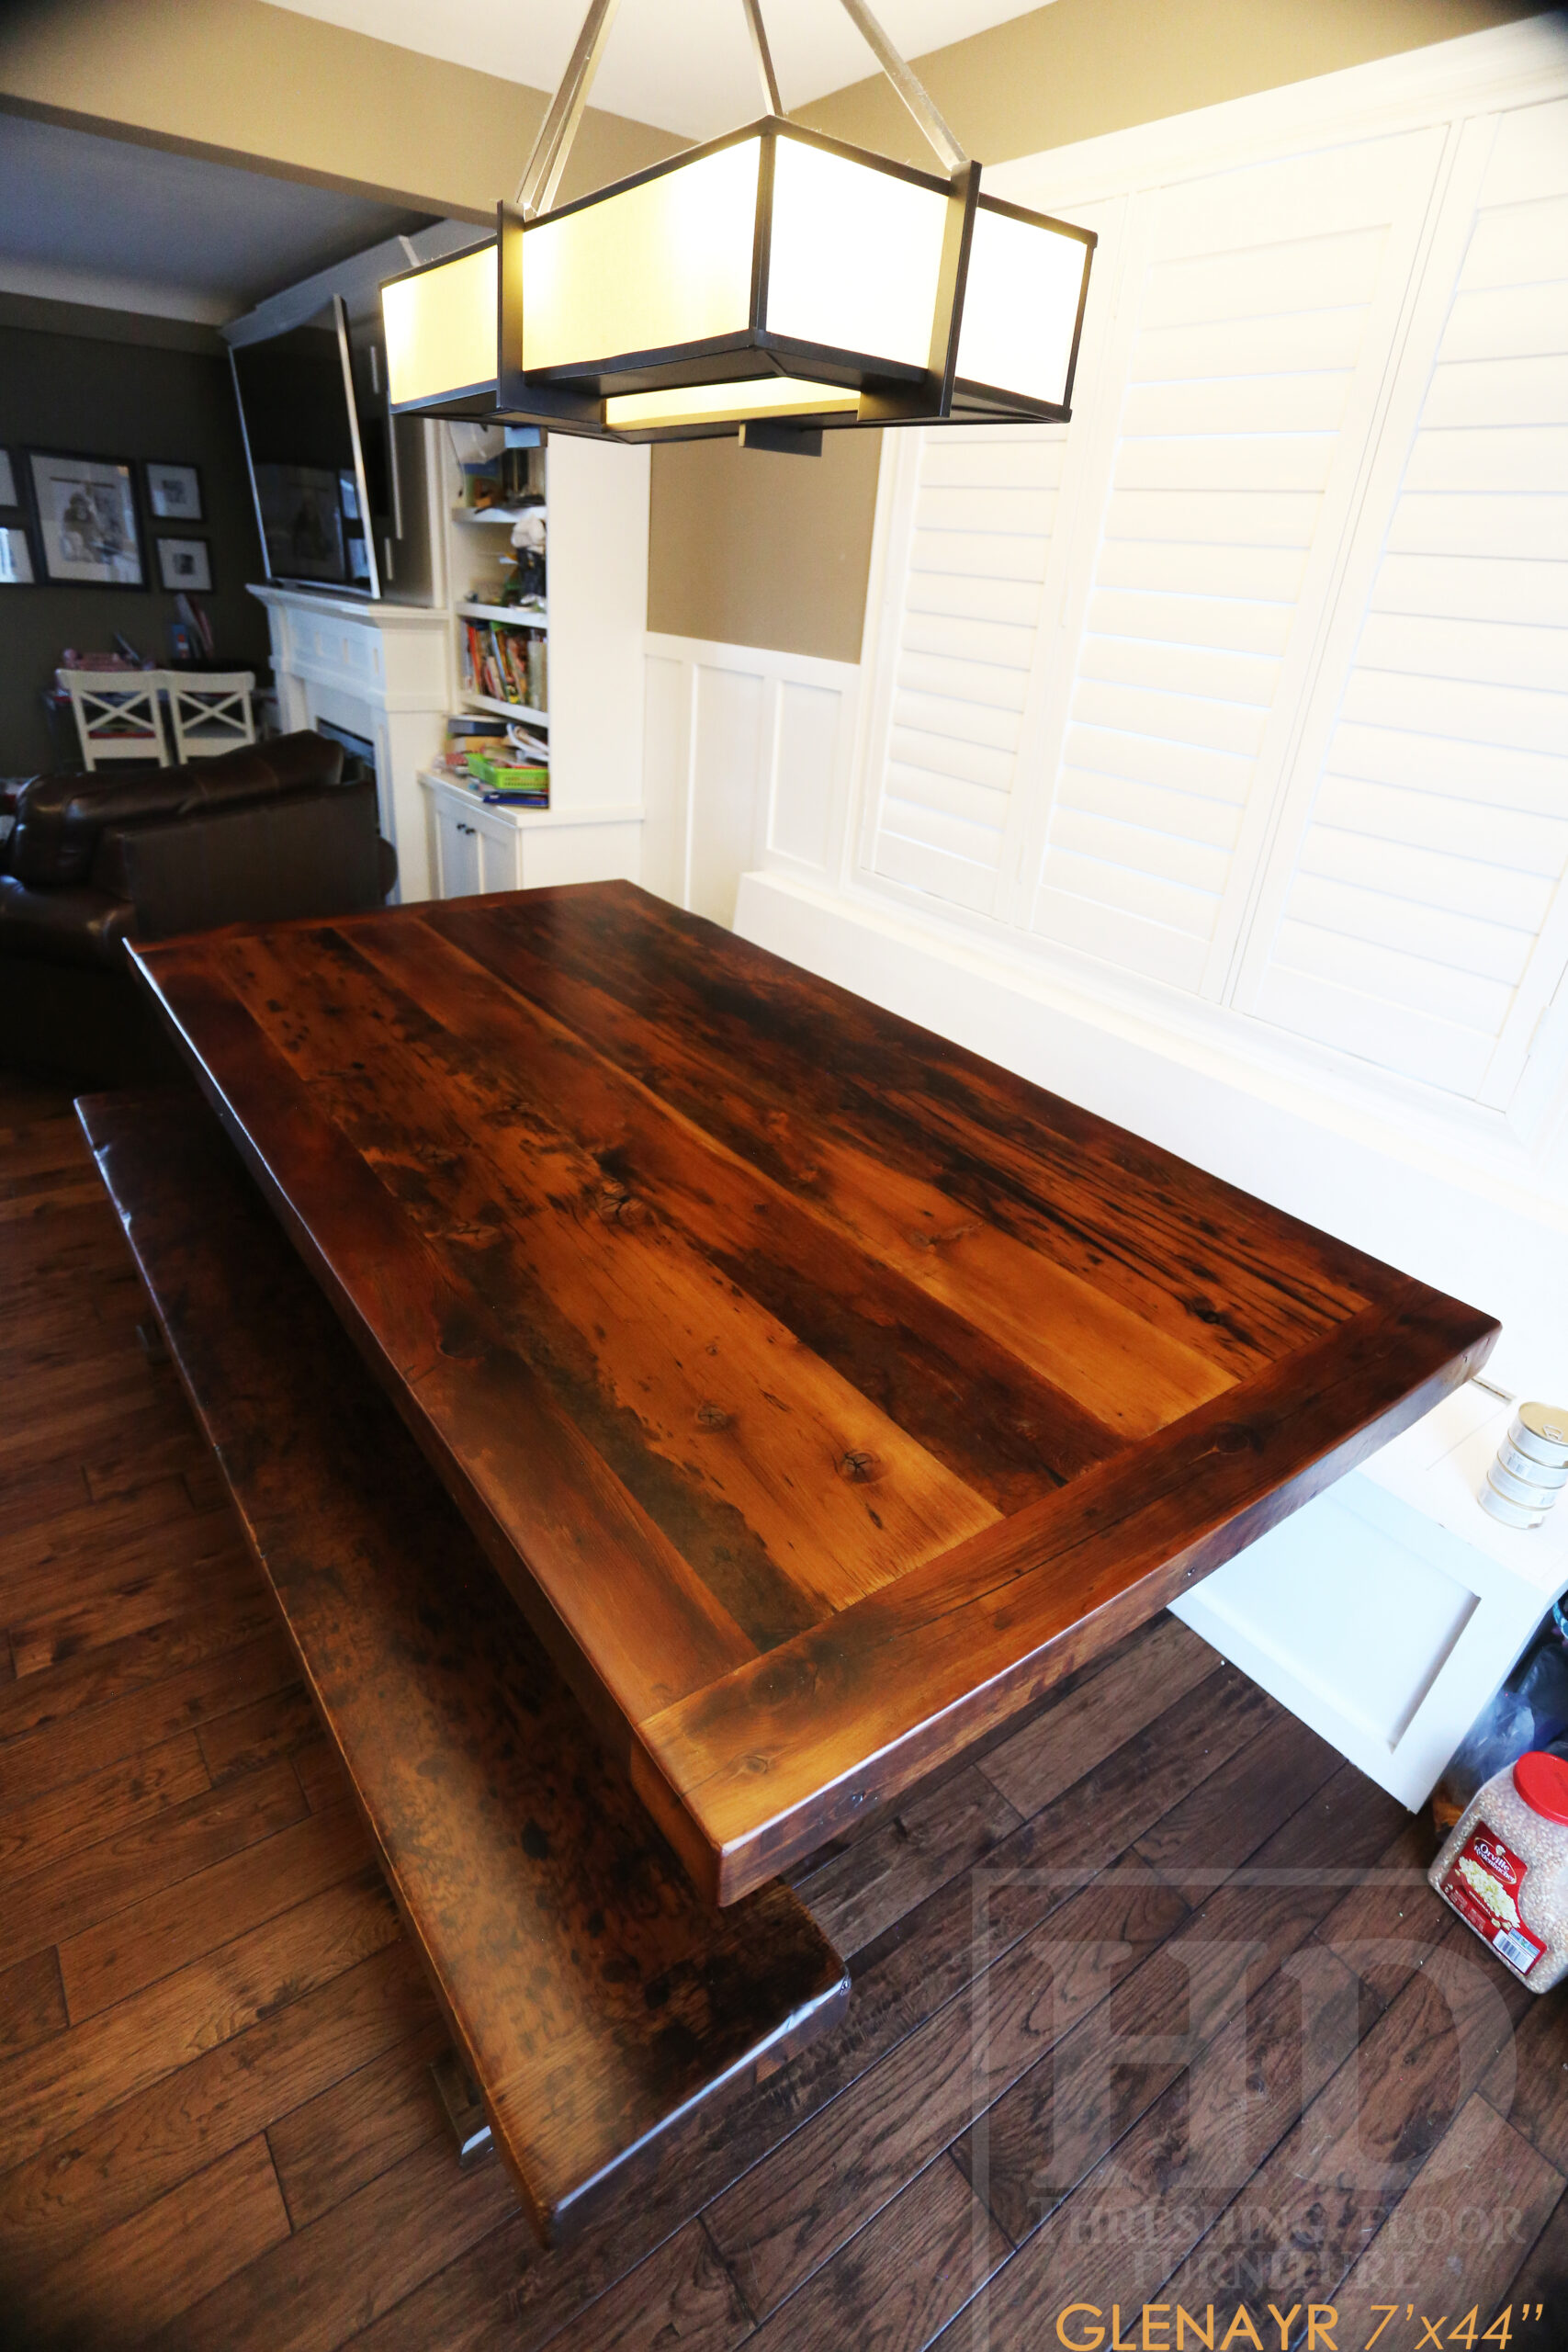 Project details: 7' Reclaimed Ontario Barnwood Table we made for a Welland, Ontario home - 44" wide â€“ Beam Option Sawbuck Base â€“ Extra Thick 3â€ Joist Material Top - Reclaimed Old Growth Hemlock Threshing Floor Construction â€“ Bread edge Ends - Original edges & distressing maintained - Premium epoxy + satin polyurethane finish â€“ 7â€™ [matching] Trestle Bench â€“ 2 Strongback Chairs / Wormy Maple / Polyurethane Clearcoat Finish - www.table.ca